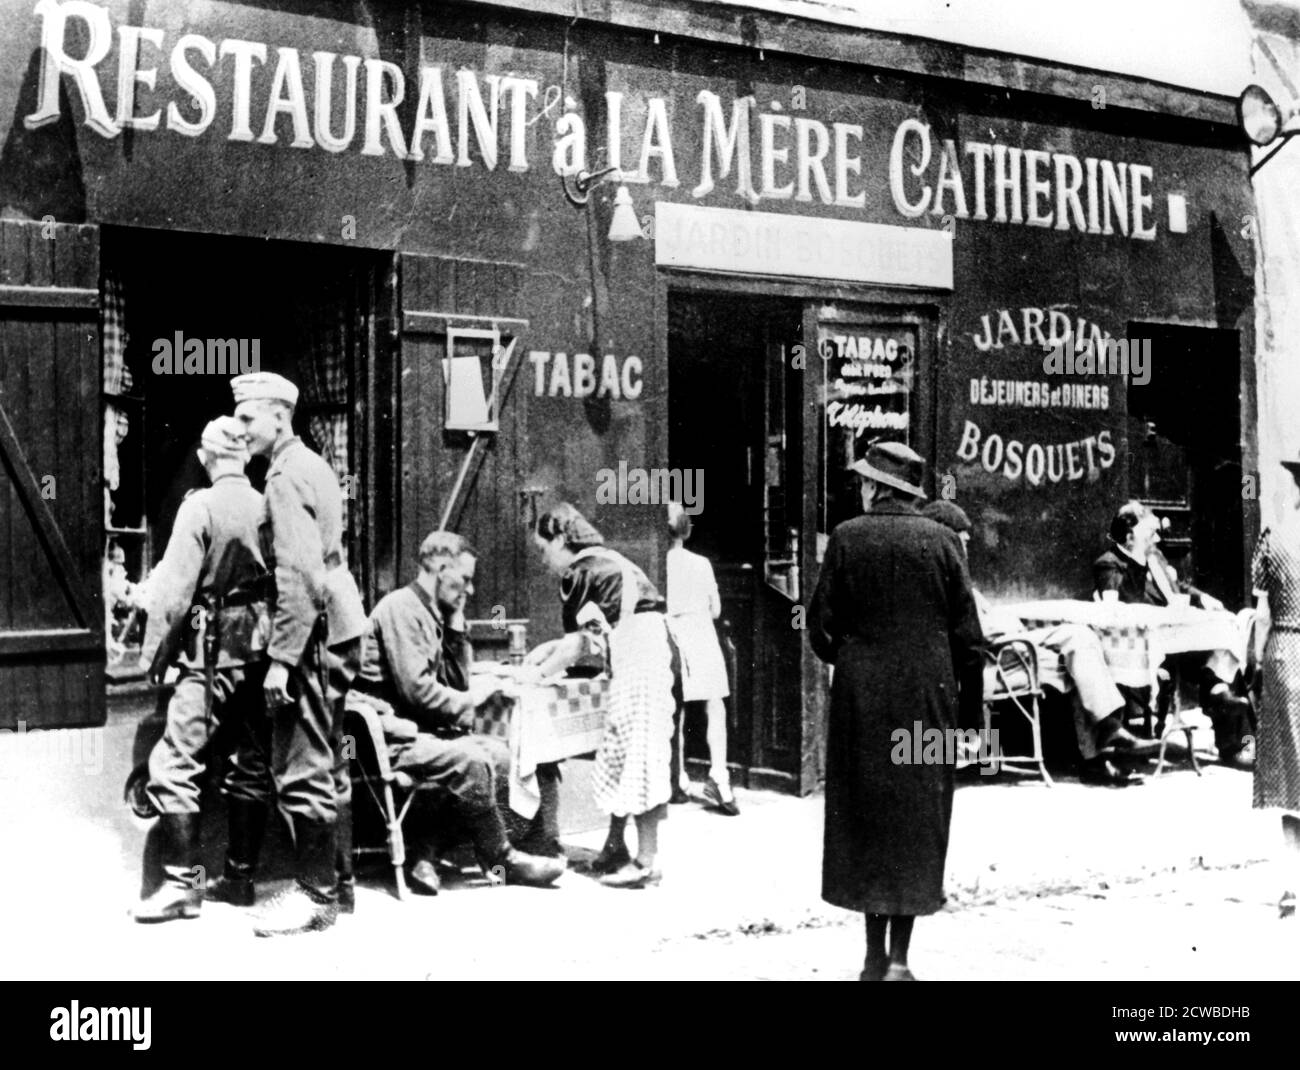 German soldiers at a restaurant, occupied Paris, June 1940. Paris fell to the Nazis on 14 June 1940, beginning a four year occupation. The photographer is unknown. Stock Photo